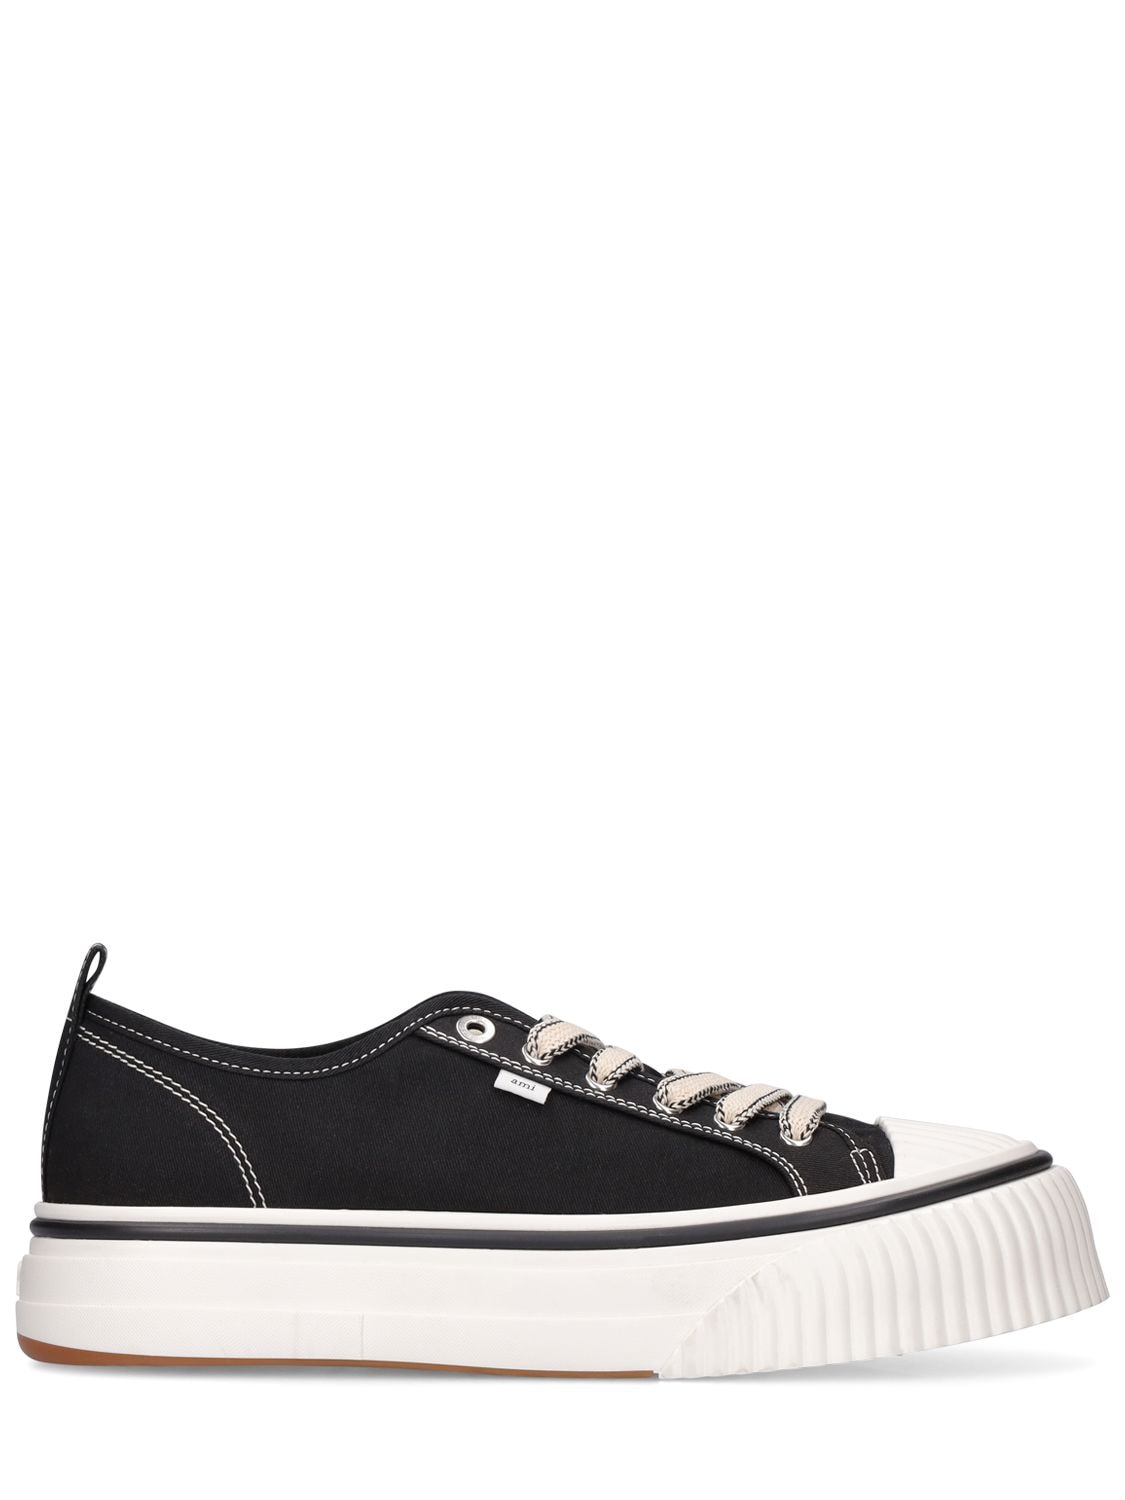 Cotton Canvas Low Top Sneakers